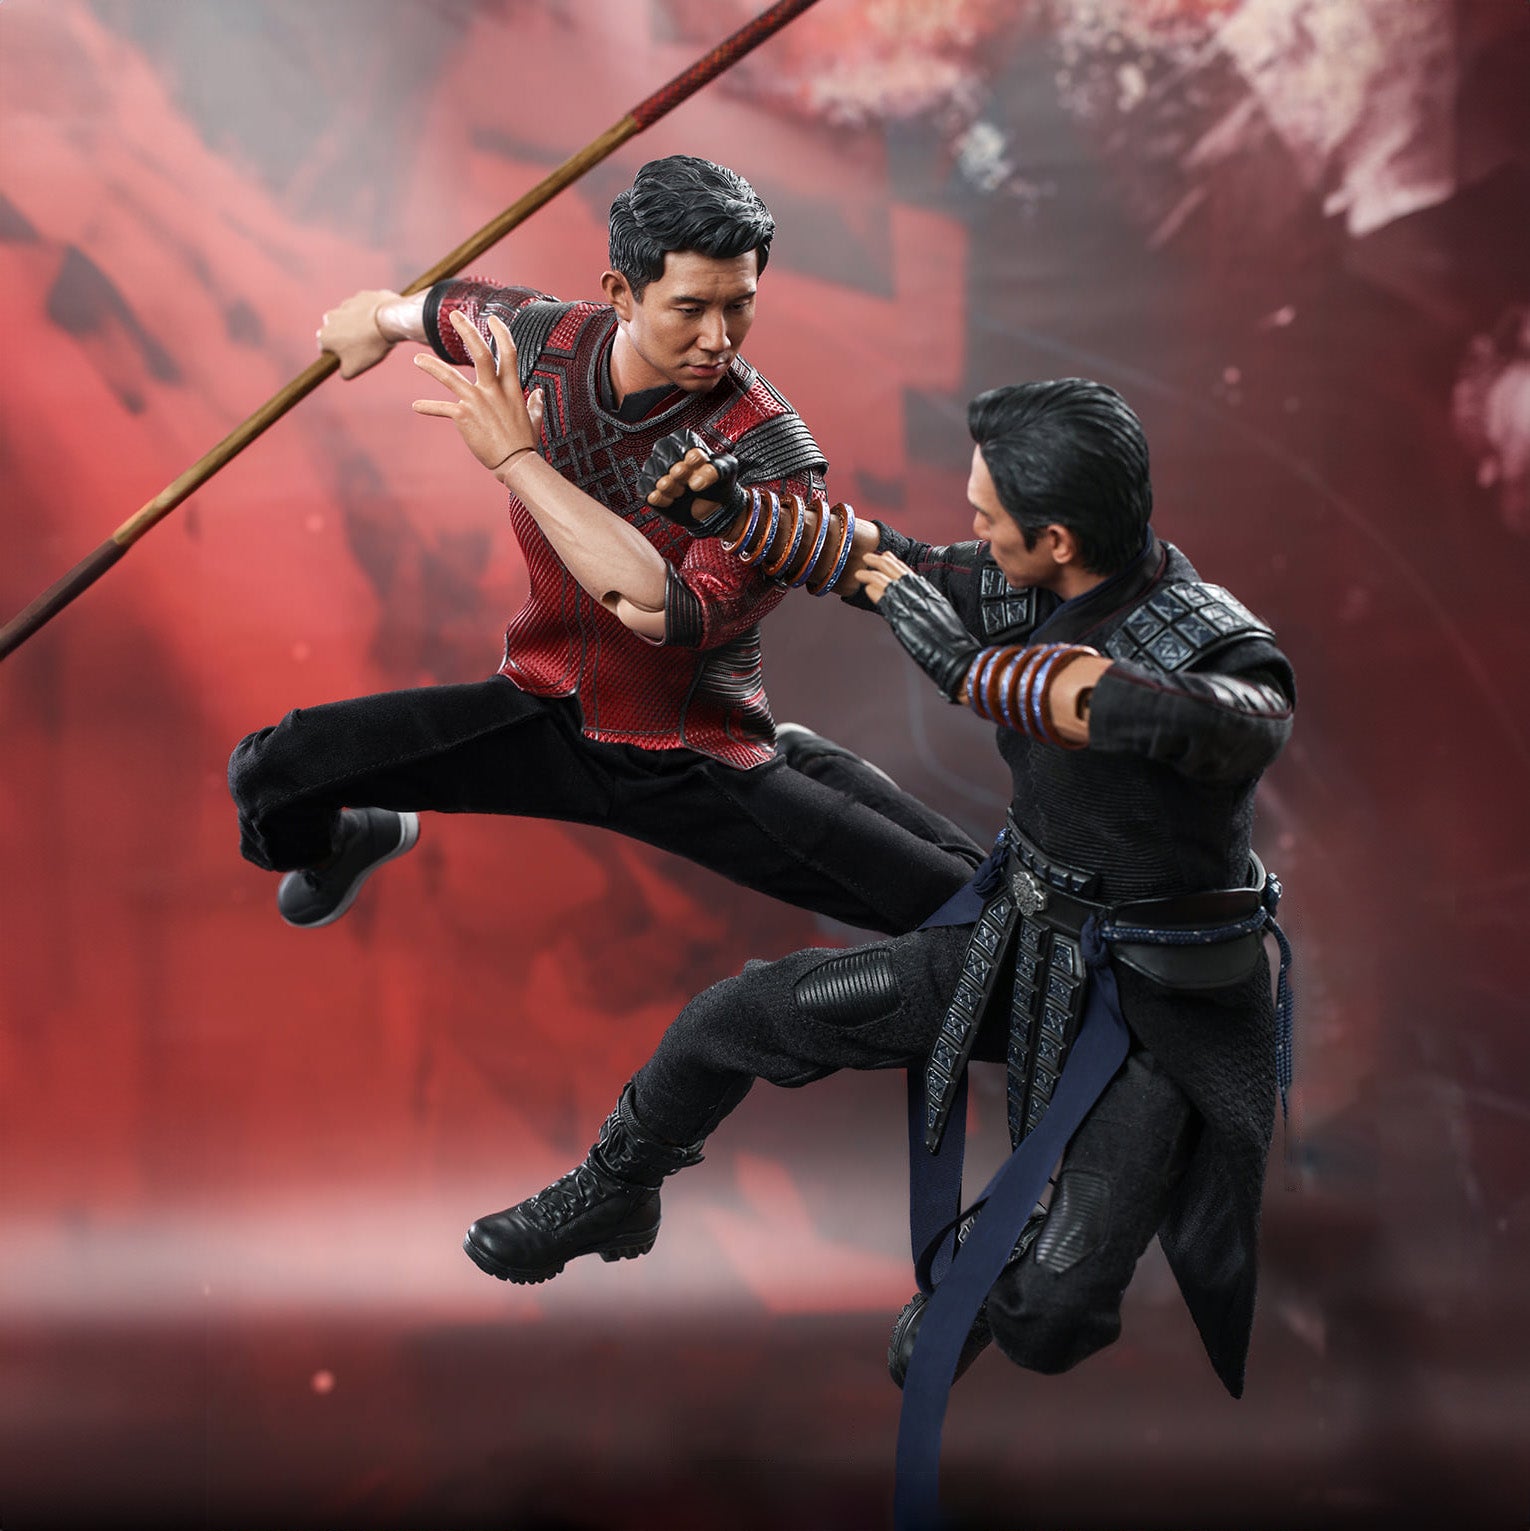 (IN STOCK) Hot Toys - MMS614 - Shang-Chi and the Legend of the Ten Rings - Shang-Chi - Marvelous Toys